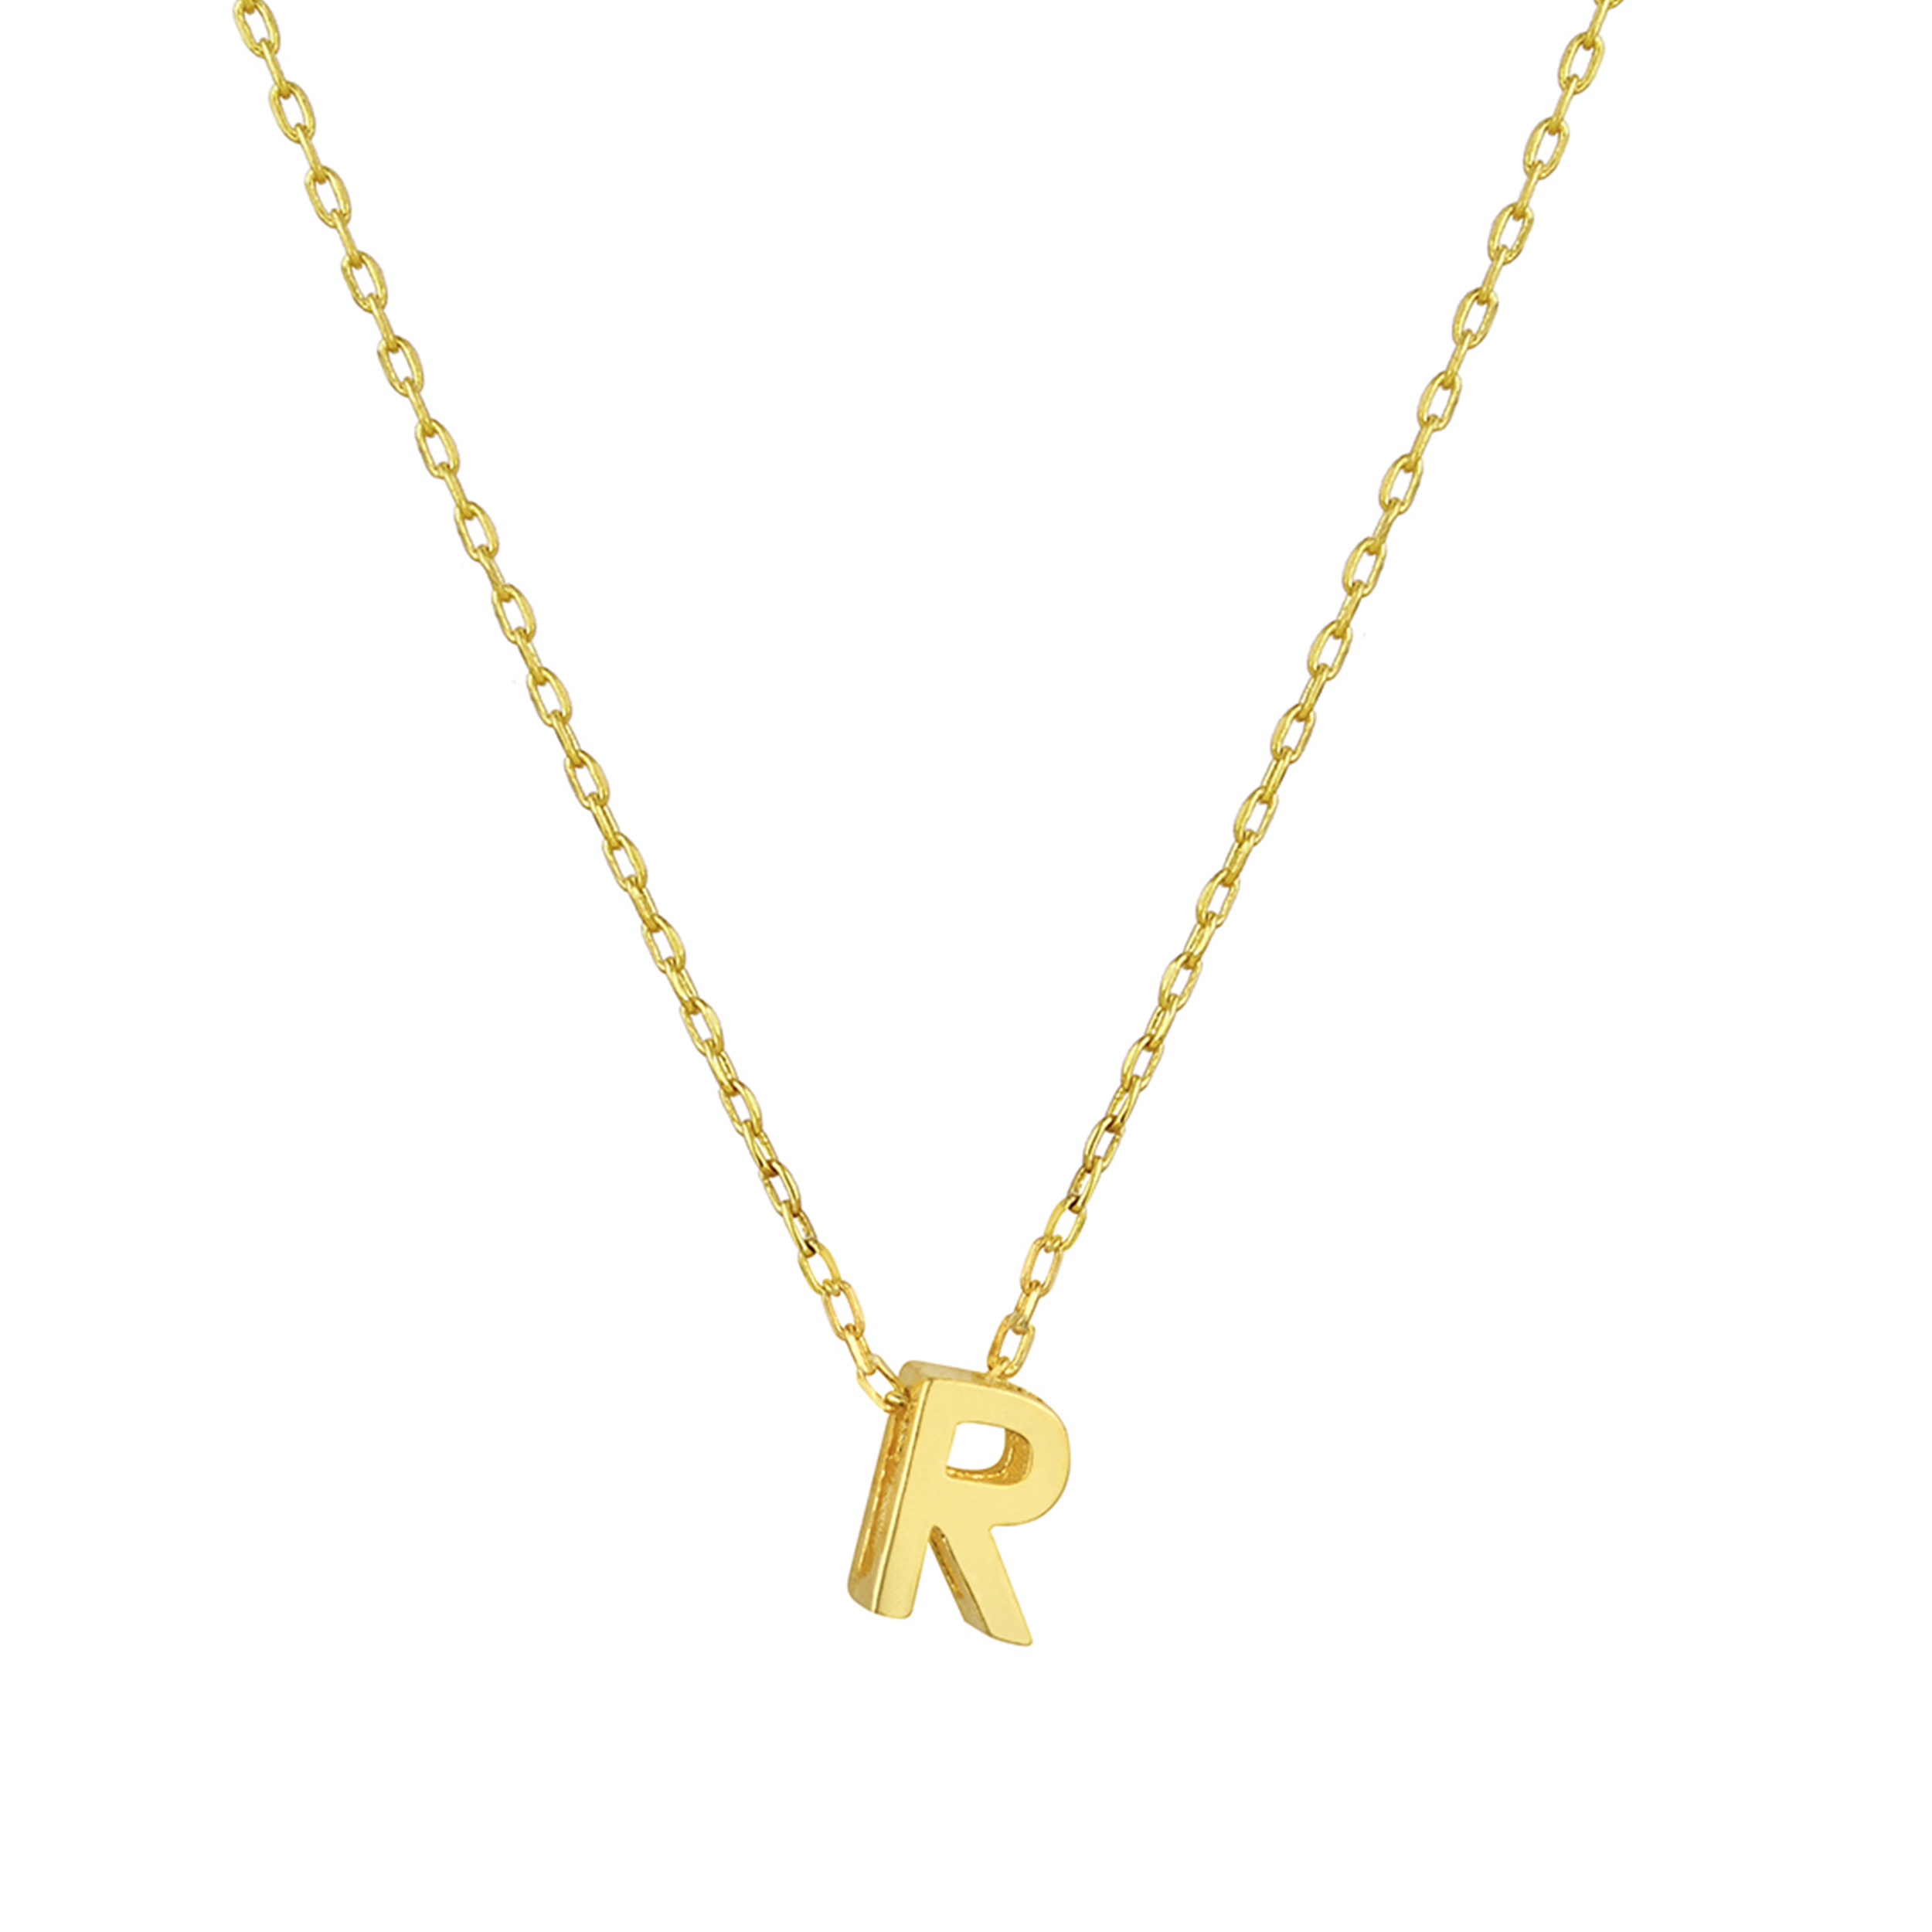 Initial Necklaces | Alphabet Jewellery | Letter R Necklace - Completedworks  | Completedworks